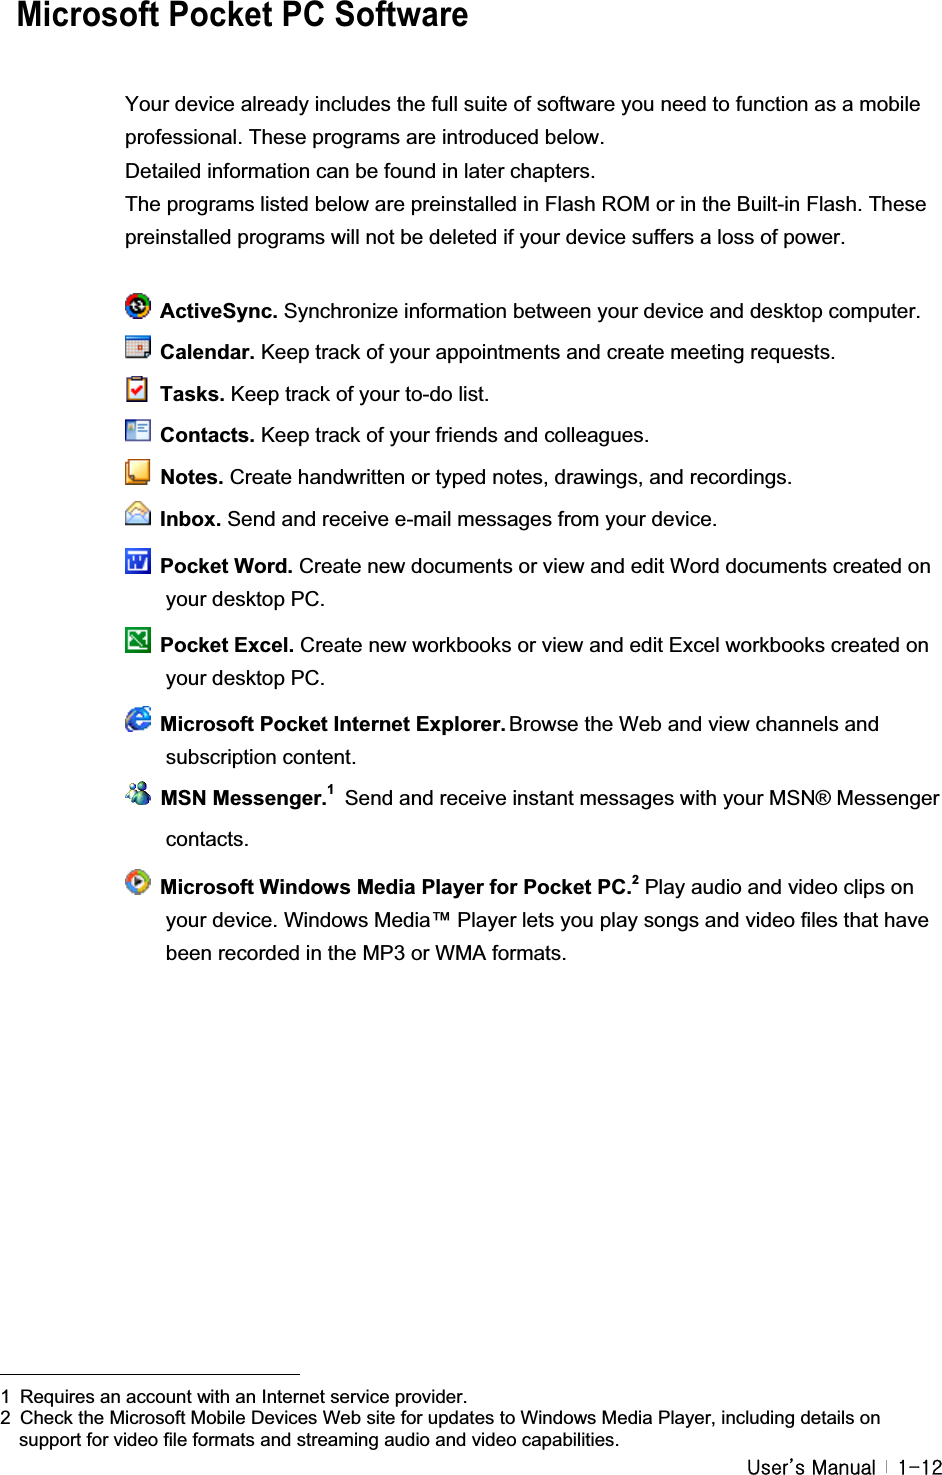 G|˅GtG G XTXY  Microsoft Pocket PC Software Your device already includes the full suite of software you need to function as a mobile professional. These programs are introduced below. Detailed information can be found in later chapters. The programs listed below are preinstalled in Flash ROM or in the Built-in Flash. These preinstalled programs will not be deleted if your device suffers a loss of power. ActiveSync. Synchronize information between your device and desktop computer.  Calendar. Keep track of your appointments and create meeting requests.  Tasks. Keep track of your to-do list.  Contacts. Keep track of your friends and colleagues.  Notes. Create handwritten or typed notes, drawings, and recordings.  Inbox. Send and receive e-mail messages from your device.  Pocket Word. Create new documents or view and edit Word documents created on your desktop PC.  Pocket Excel. Create new workbooks or view and edit Excel workbooks created on your desktop PC.   Microsoft Pocket Internet Explorer. Browse the Web and view channels and subscription content.  MSN Messenger.1Send and receive instant messages with your MSN® Messenger contacts.   Microsoft Windows Media Player for Pocket PC.2Play audio and video clips on your device. Windows Media™ Player lets you play songs and video files that have been recorded in the MP3 or WMA formats. GGGGGGGGGGGGGGGGGGGGGGGGGGGGGGGGGGGGGGGGGGGG1  Requires an account with an Internet service provider. 2  Check the Microsoft Mobile Devices Web site for updates to Windows Media Player, including details on support for video file formats and streaming audio and video capabilities.#